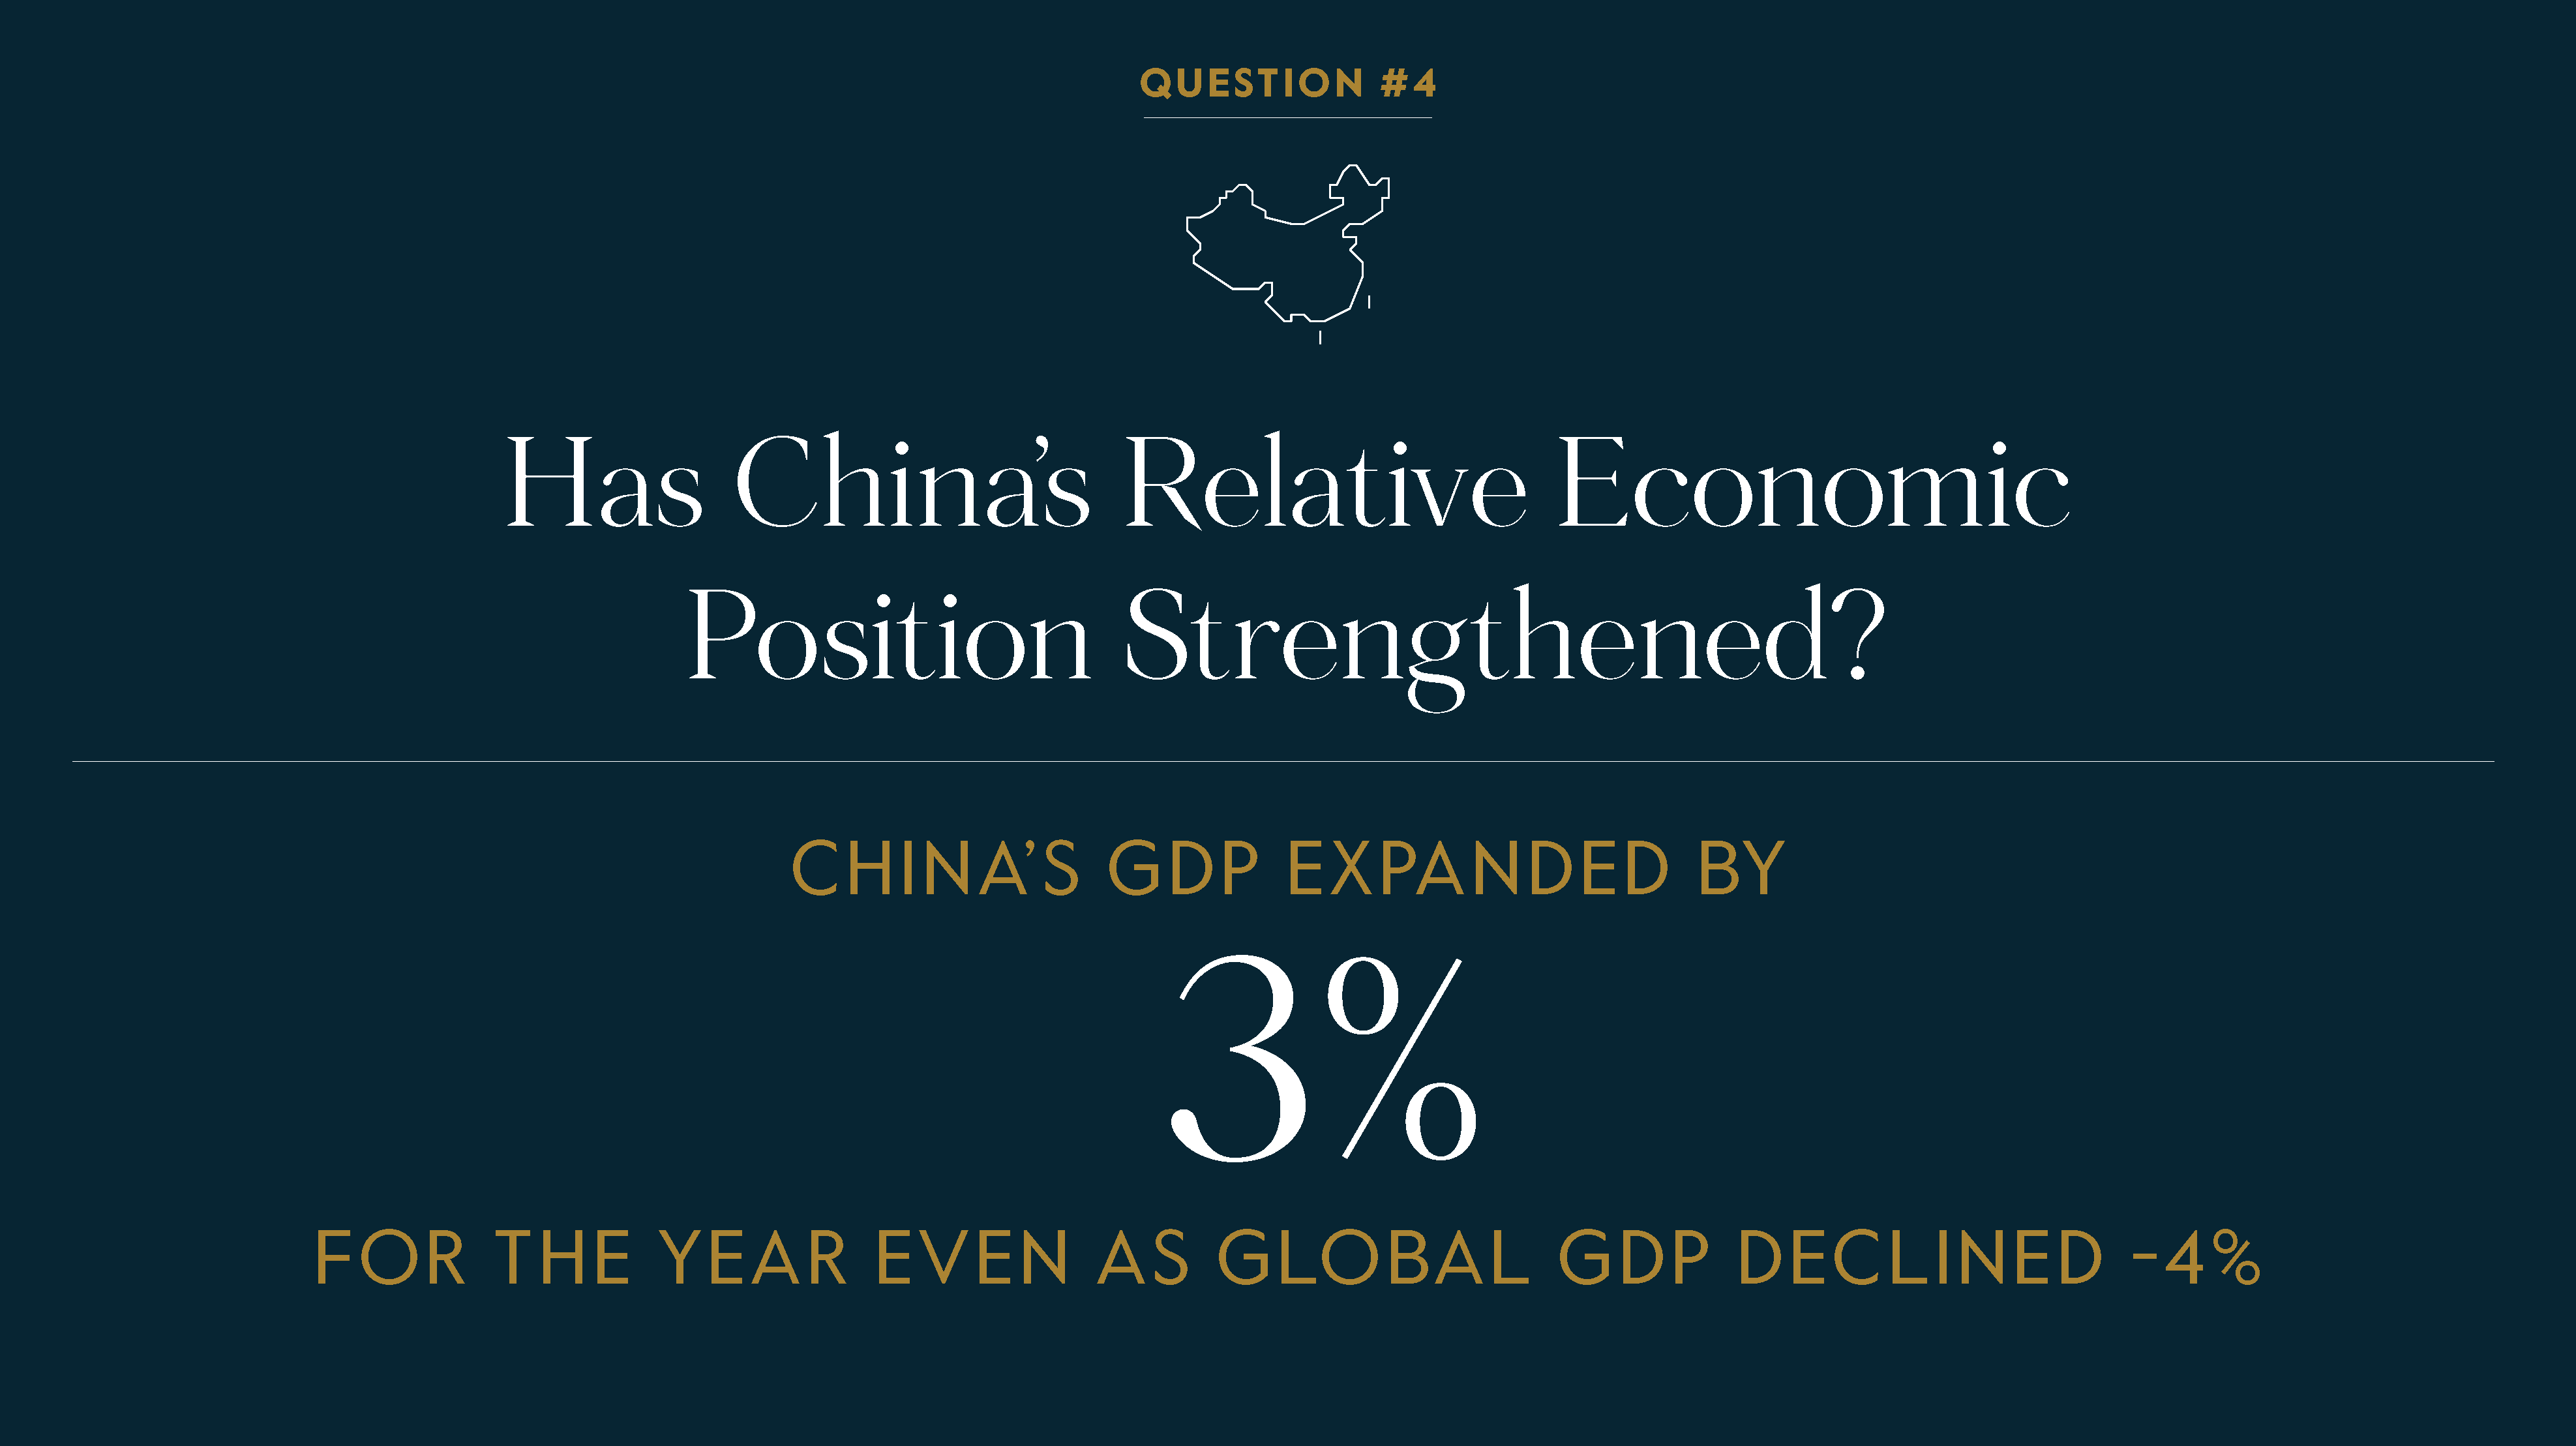 Has China's relative economic position strengthened?